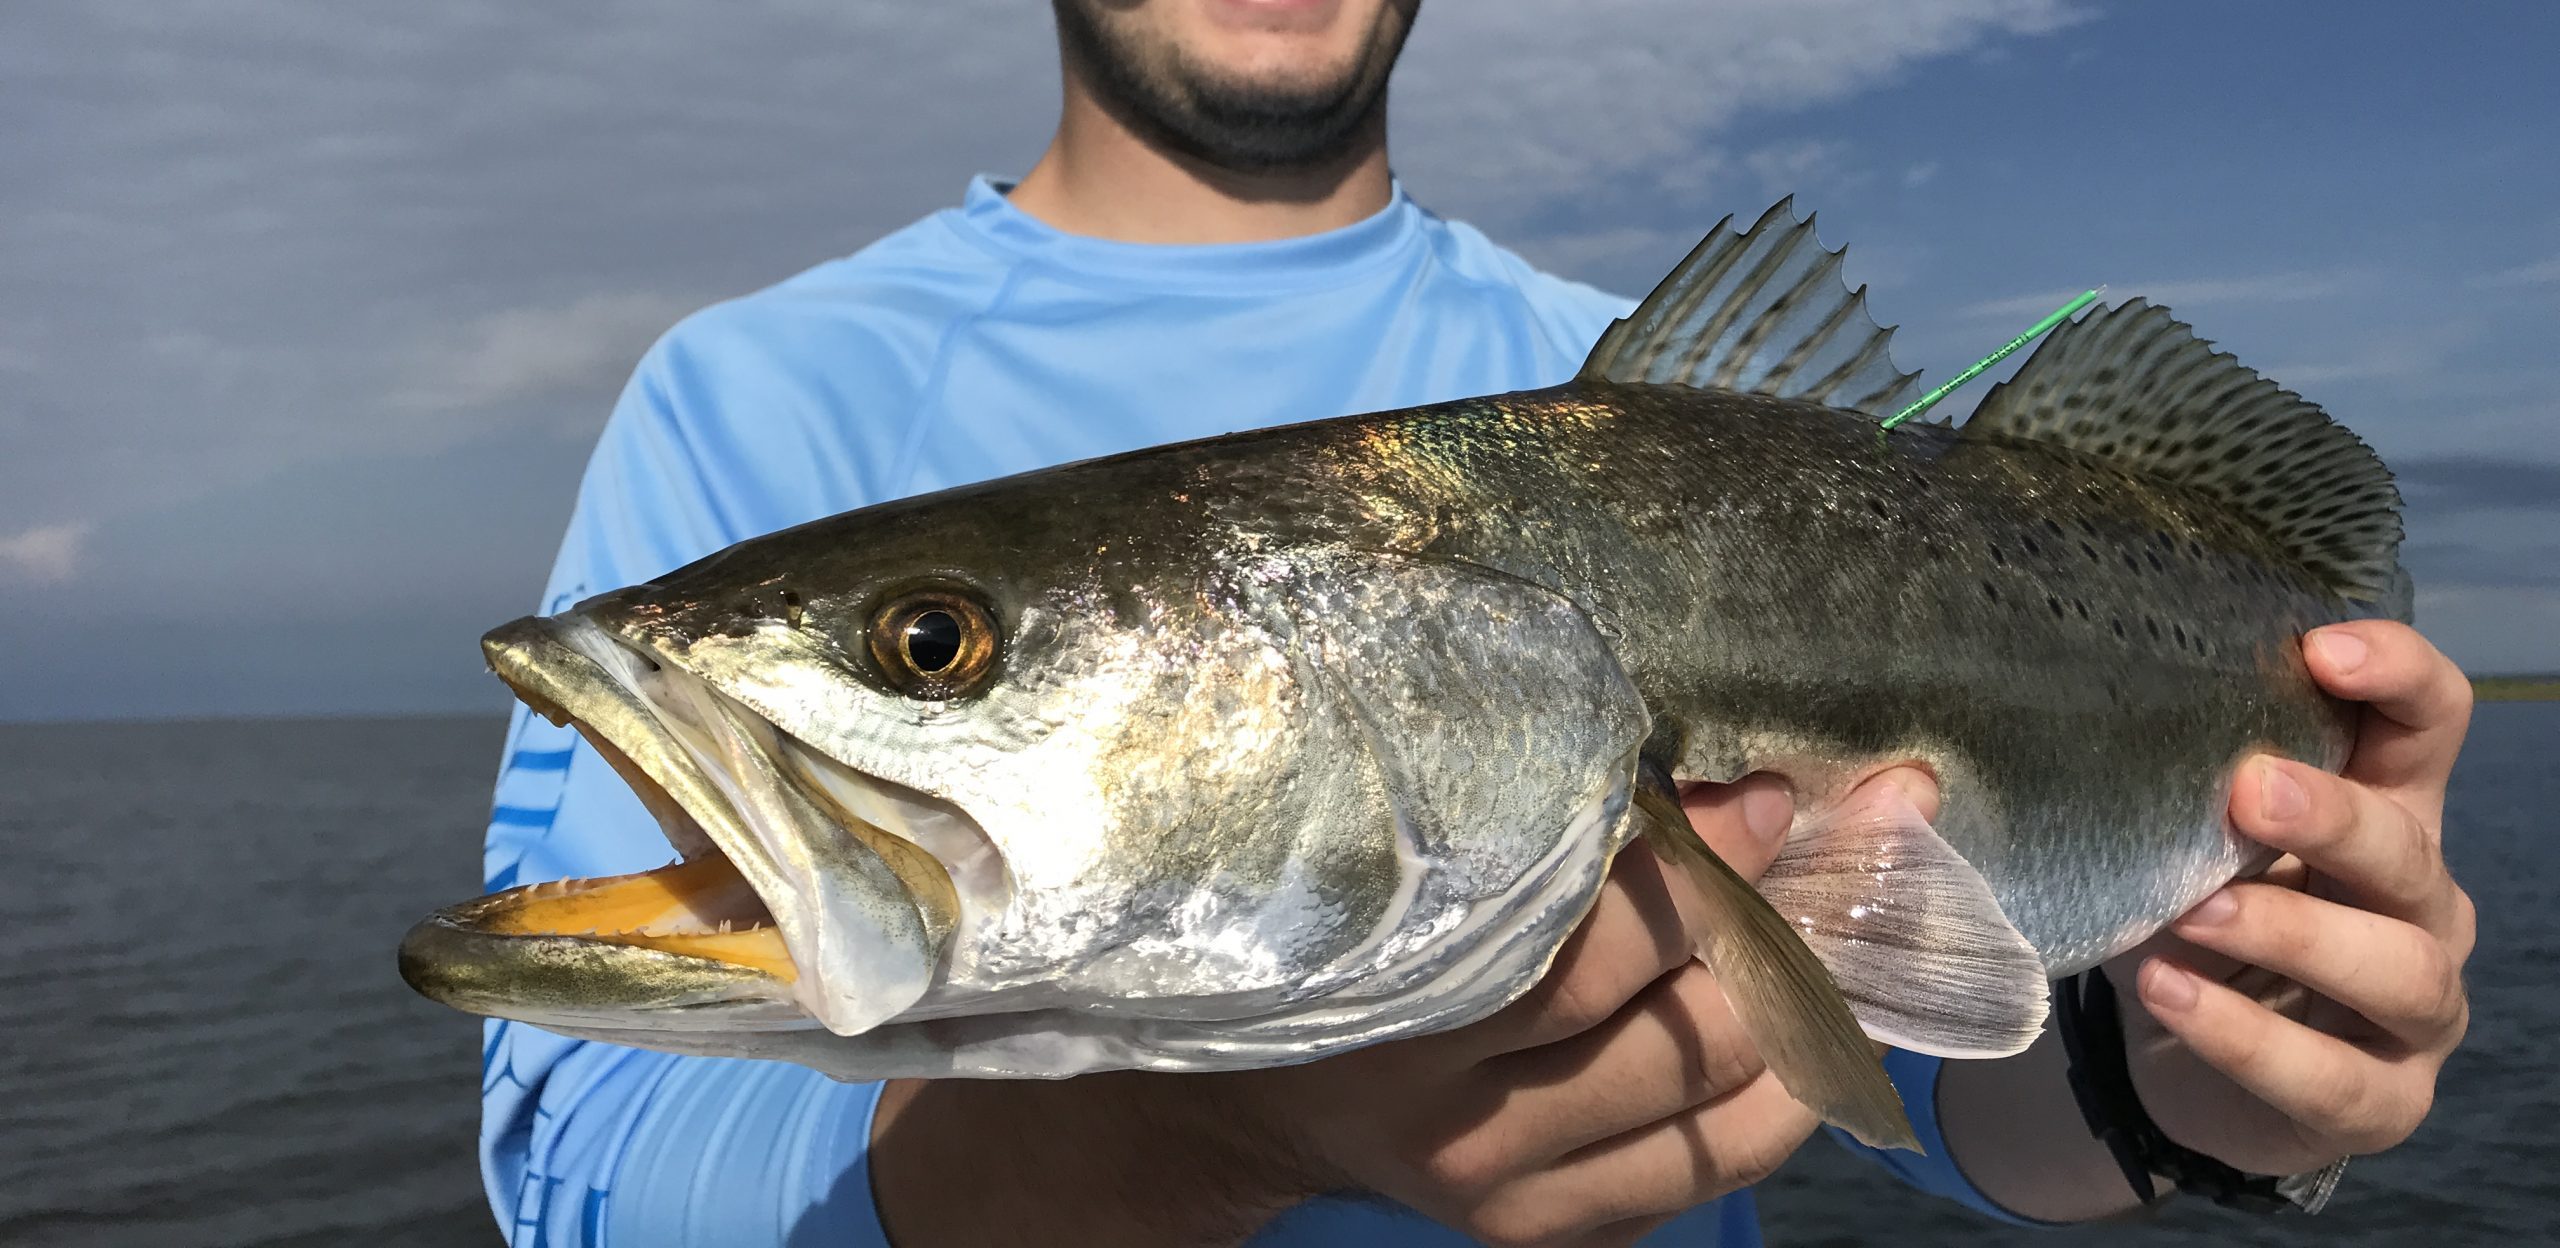 Saltwater Wade Fishing Tips For Catching Speckled Trout